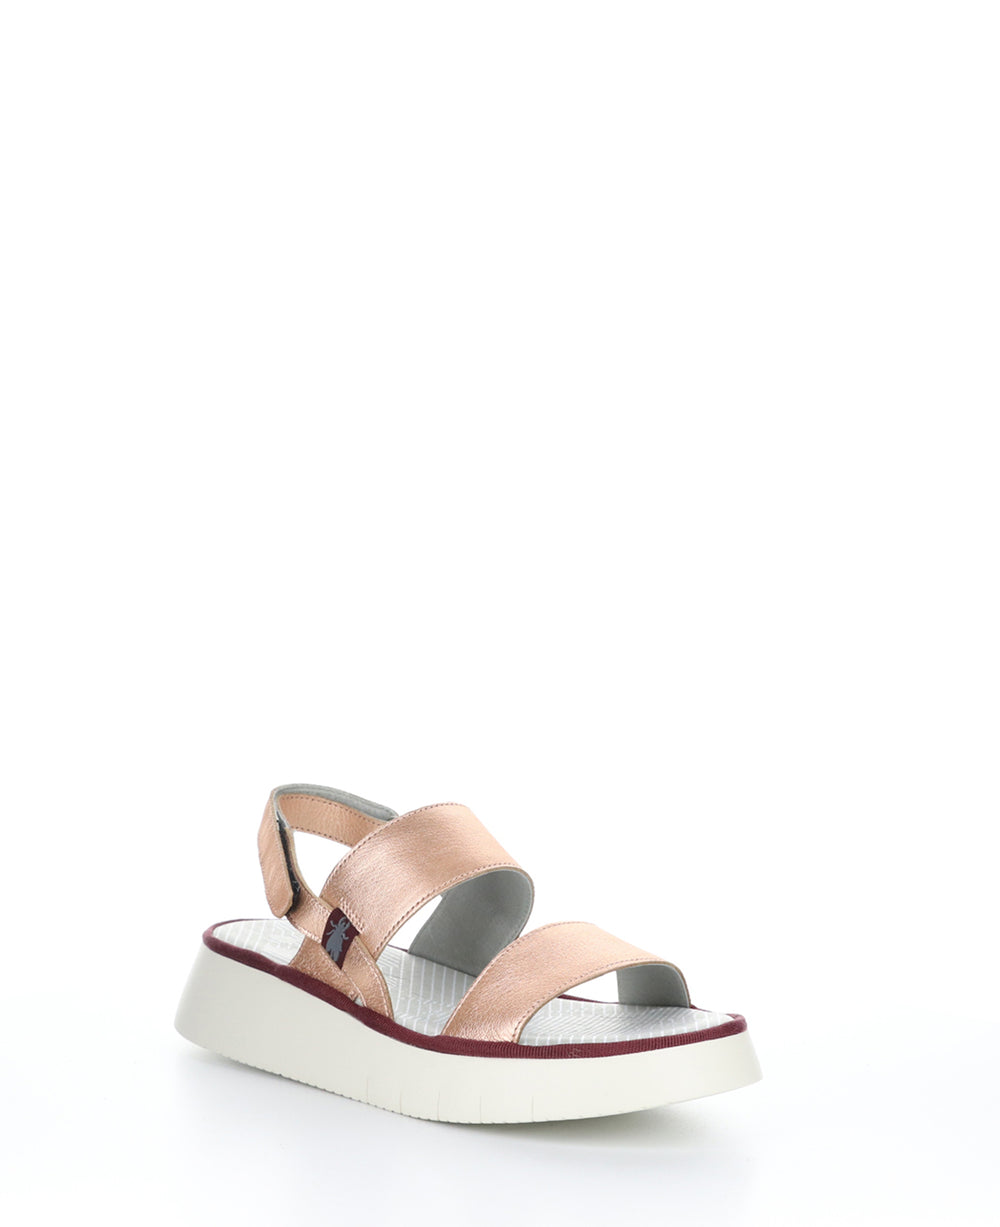 CURA318FLY BLUSH GOLD Wedge Sandals|CURA318FLY Chaussures à Bout Rond in Rose Or